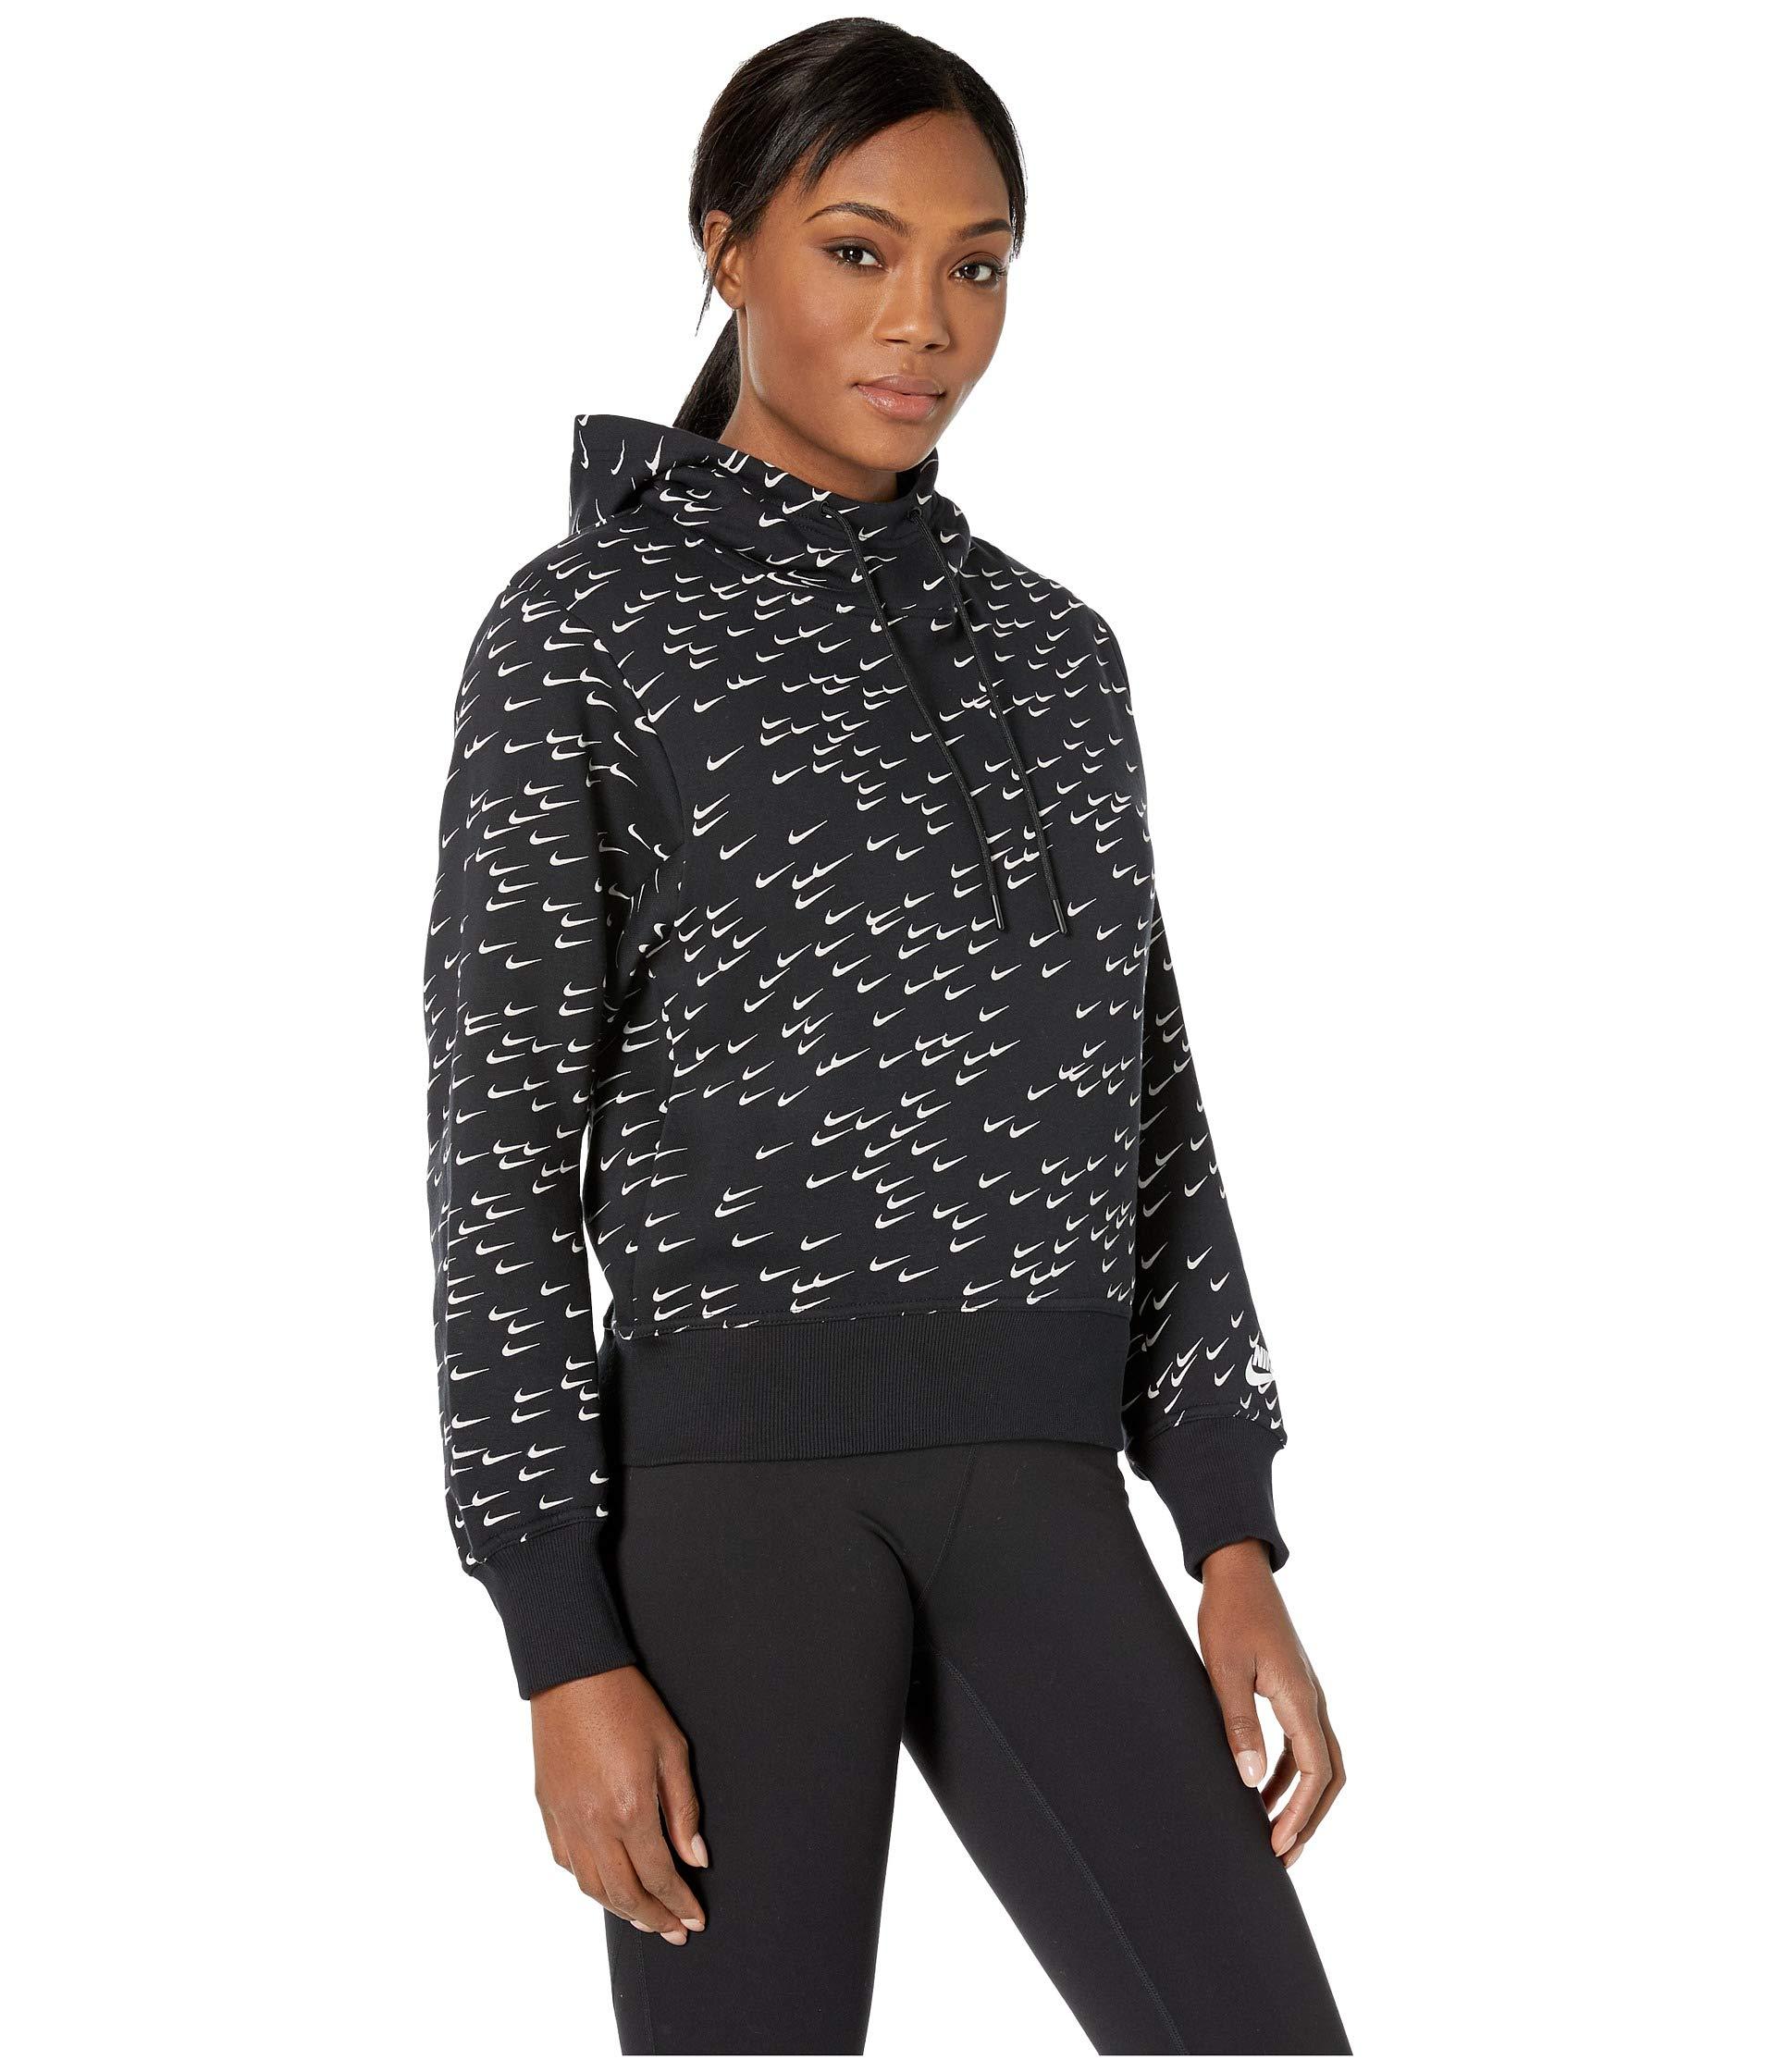 Nike Cotton All Over Swoosh Print Hoodie in Black/White (Black) | Lyst